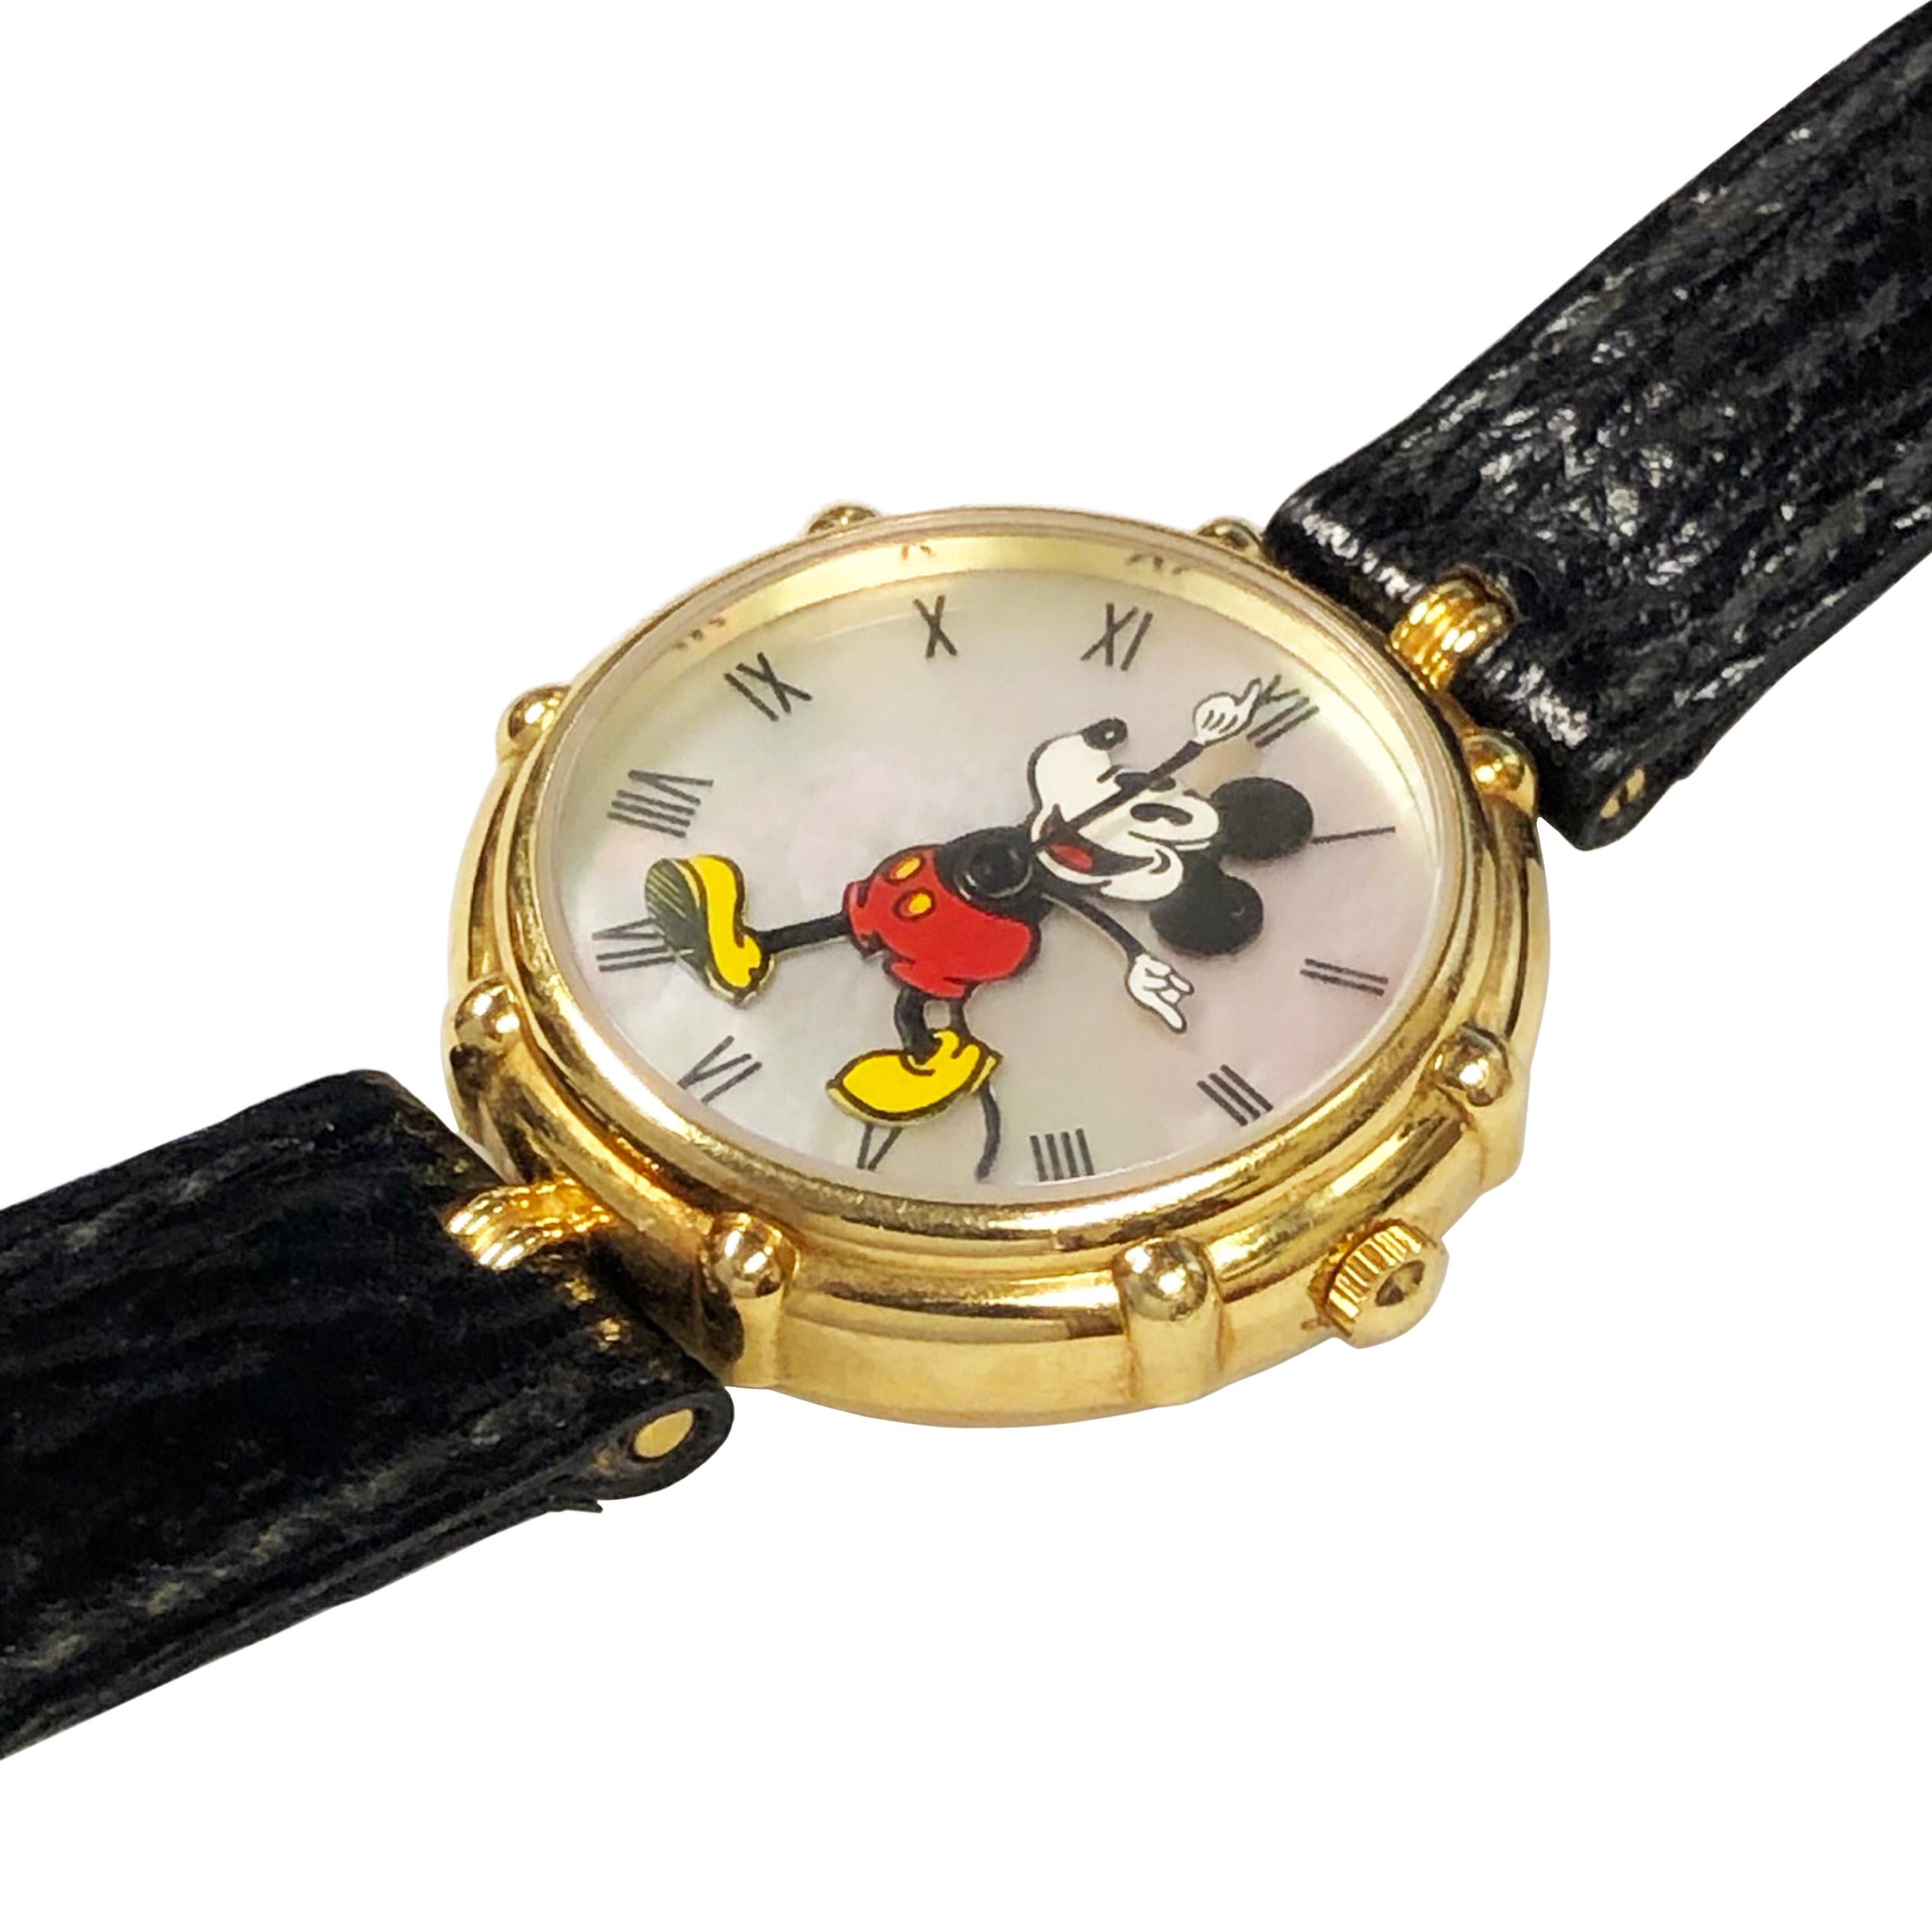 Circa 2000 Gerald Genta Mickey Mouse Wrist Watch, 30 MM 18K Yellow Gold 2 piece water resistant case. Quartz Movement, mother of Pearl Dial with black Roman numerals and an Enamel Mickey Mouse with Animated Hands.  Original Black Stitched Grain